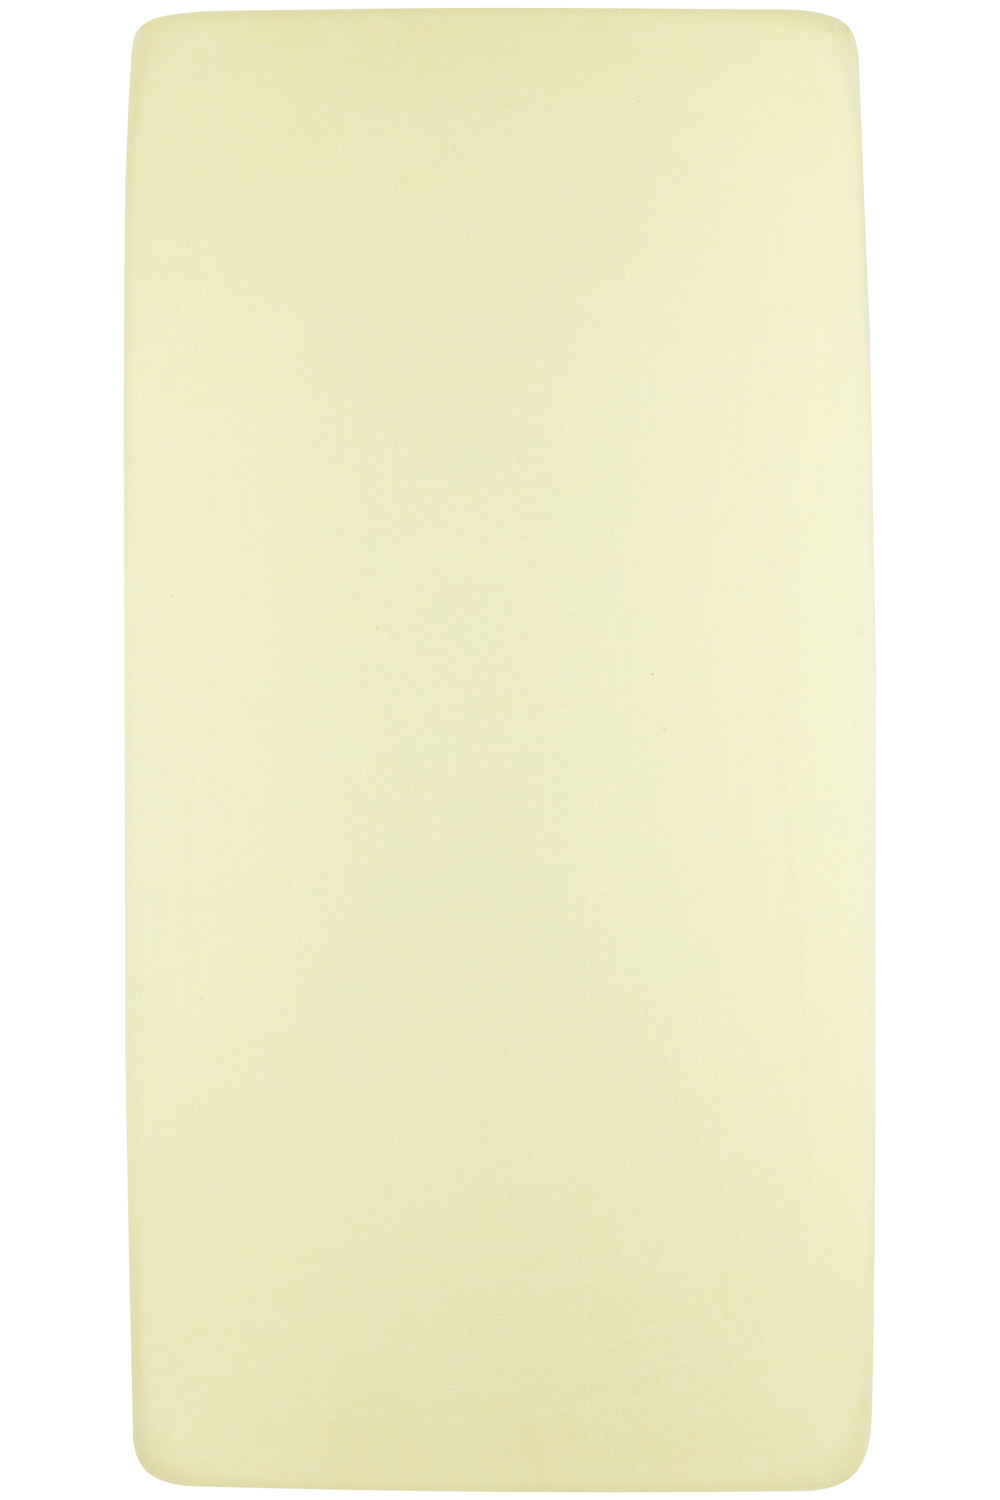 Jersey Fitted Sheet Crib - Soft Yellow - 40x80/90cm